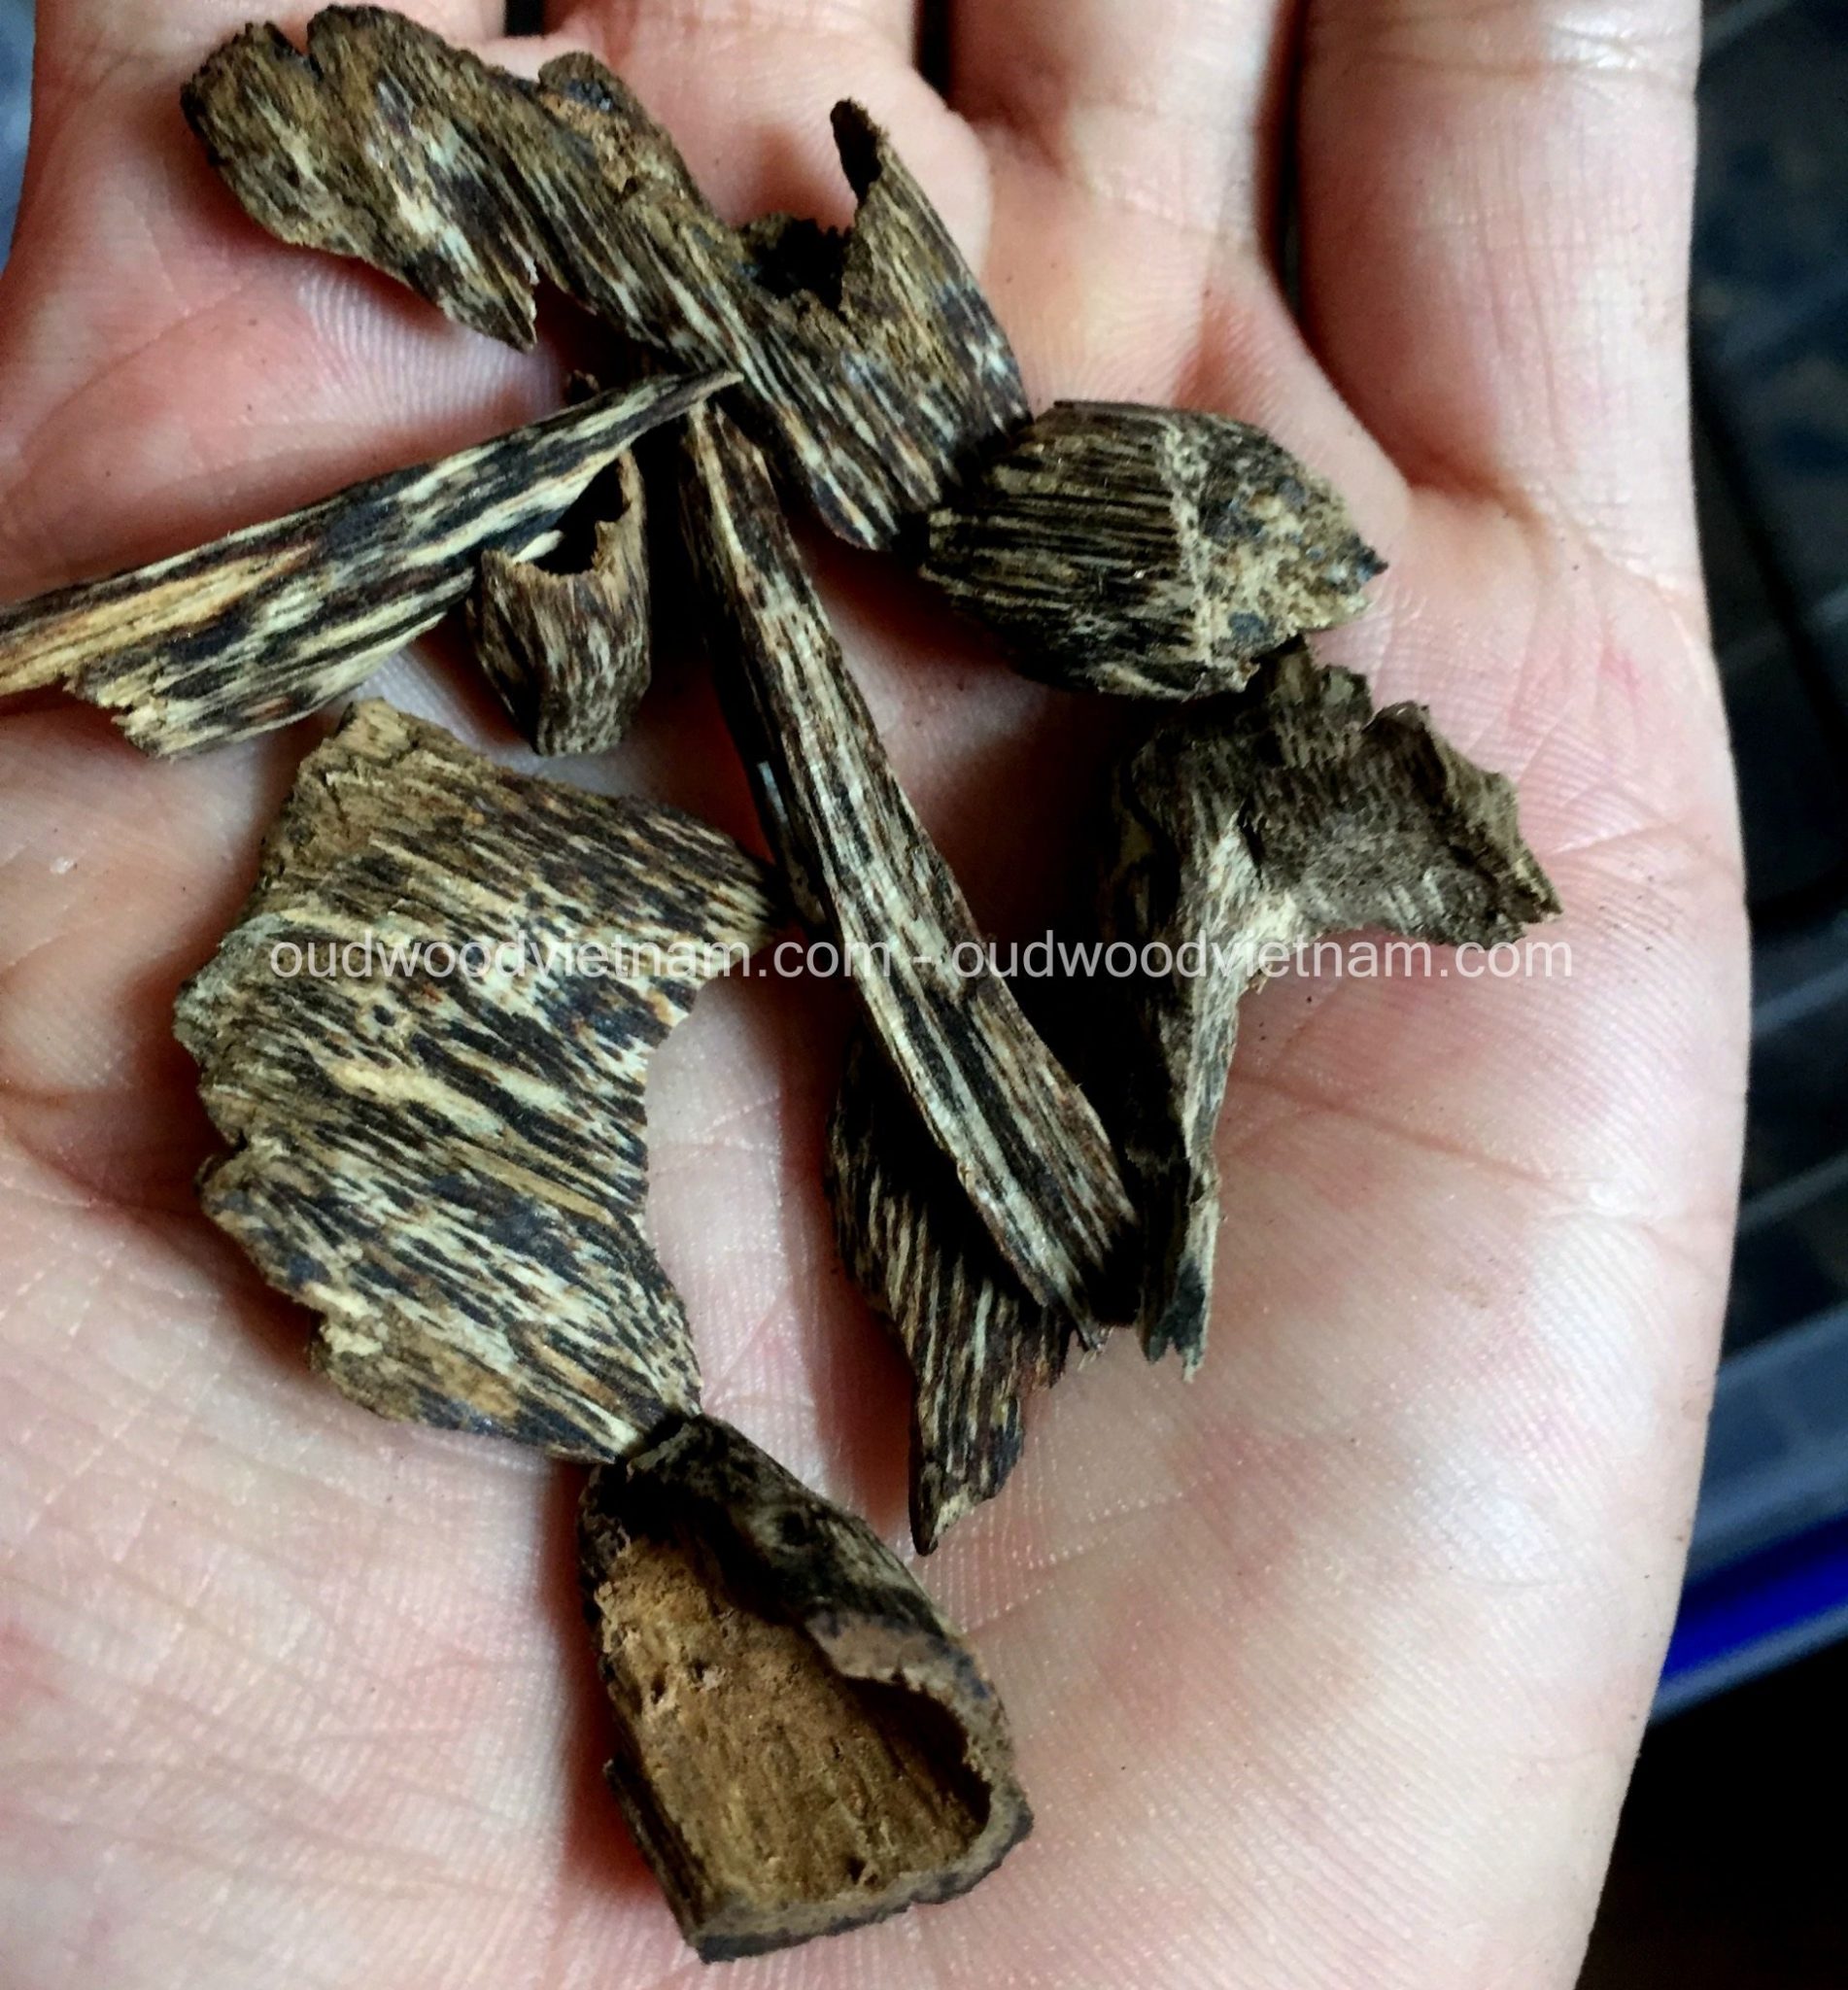 Details about   Oud Agarwood chips Thailand Natural Prachinburi Sweet incense Fragrant oudh wood 